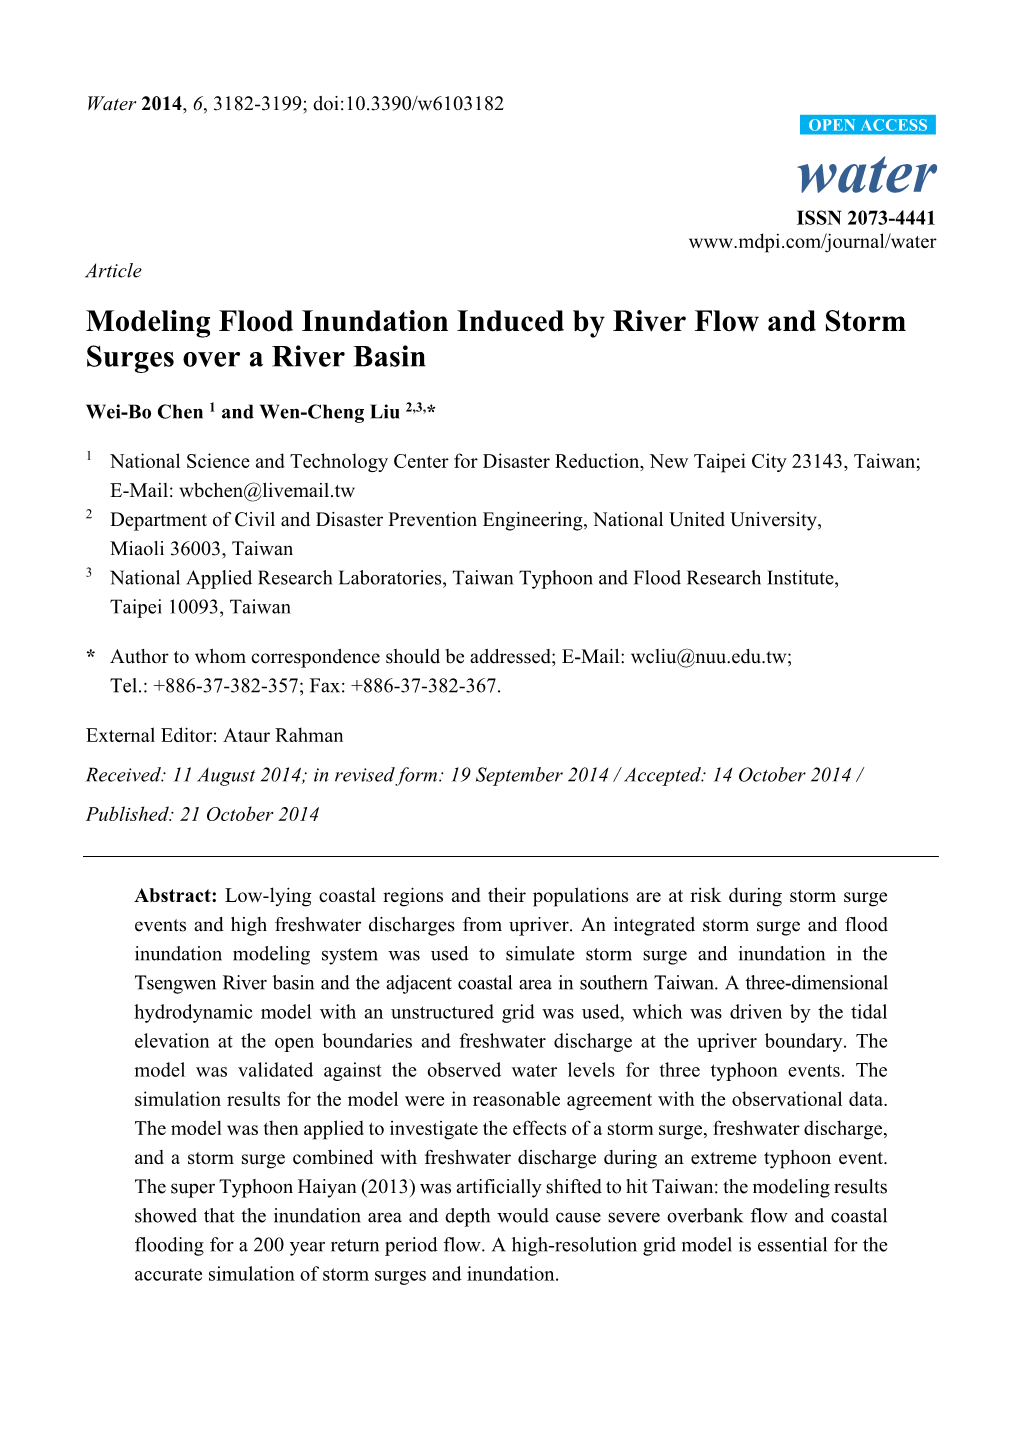 Modeling Flood Inundation Induced by River Flow and Storm Surges Over a River Basin